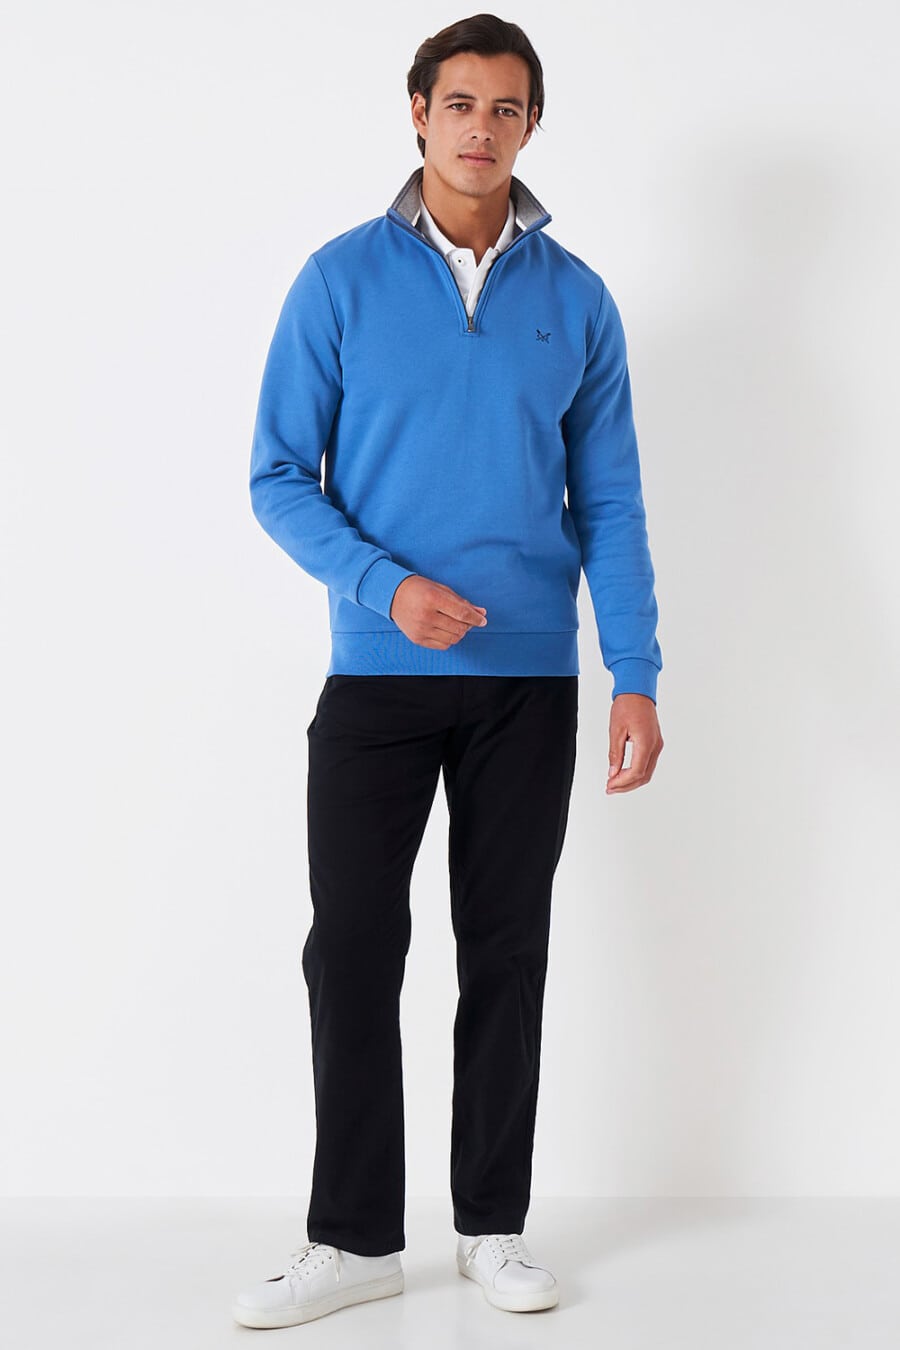 Men's black pants, white shirt, royal blue quarter-zip sweater and white sneakers outfit